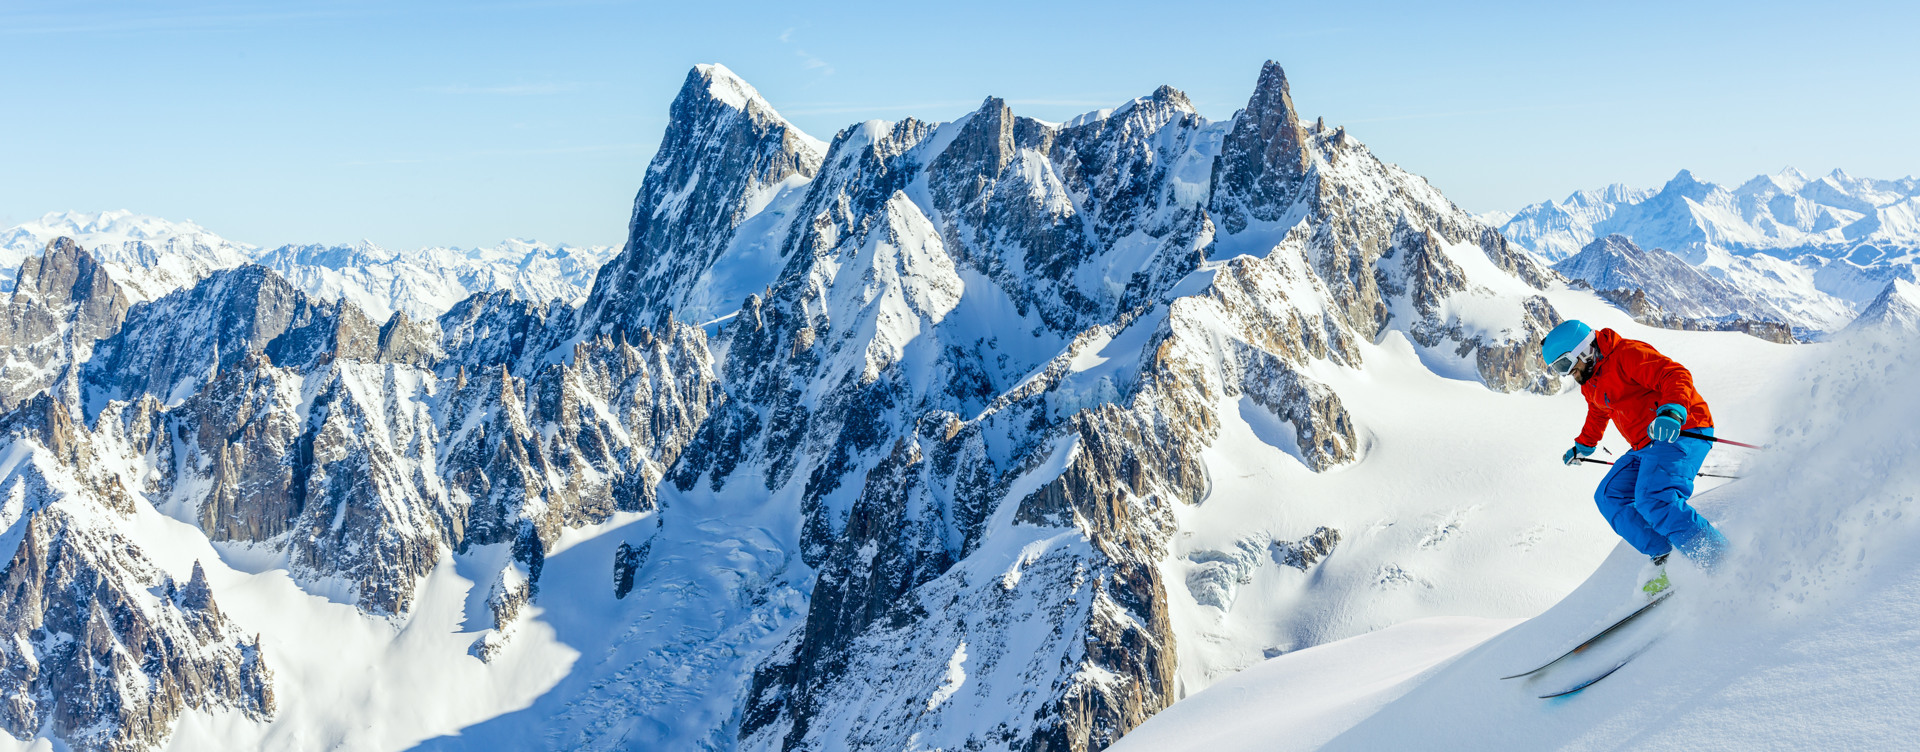 Experience an unforgettable winter in the beautiful Alps